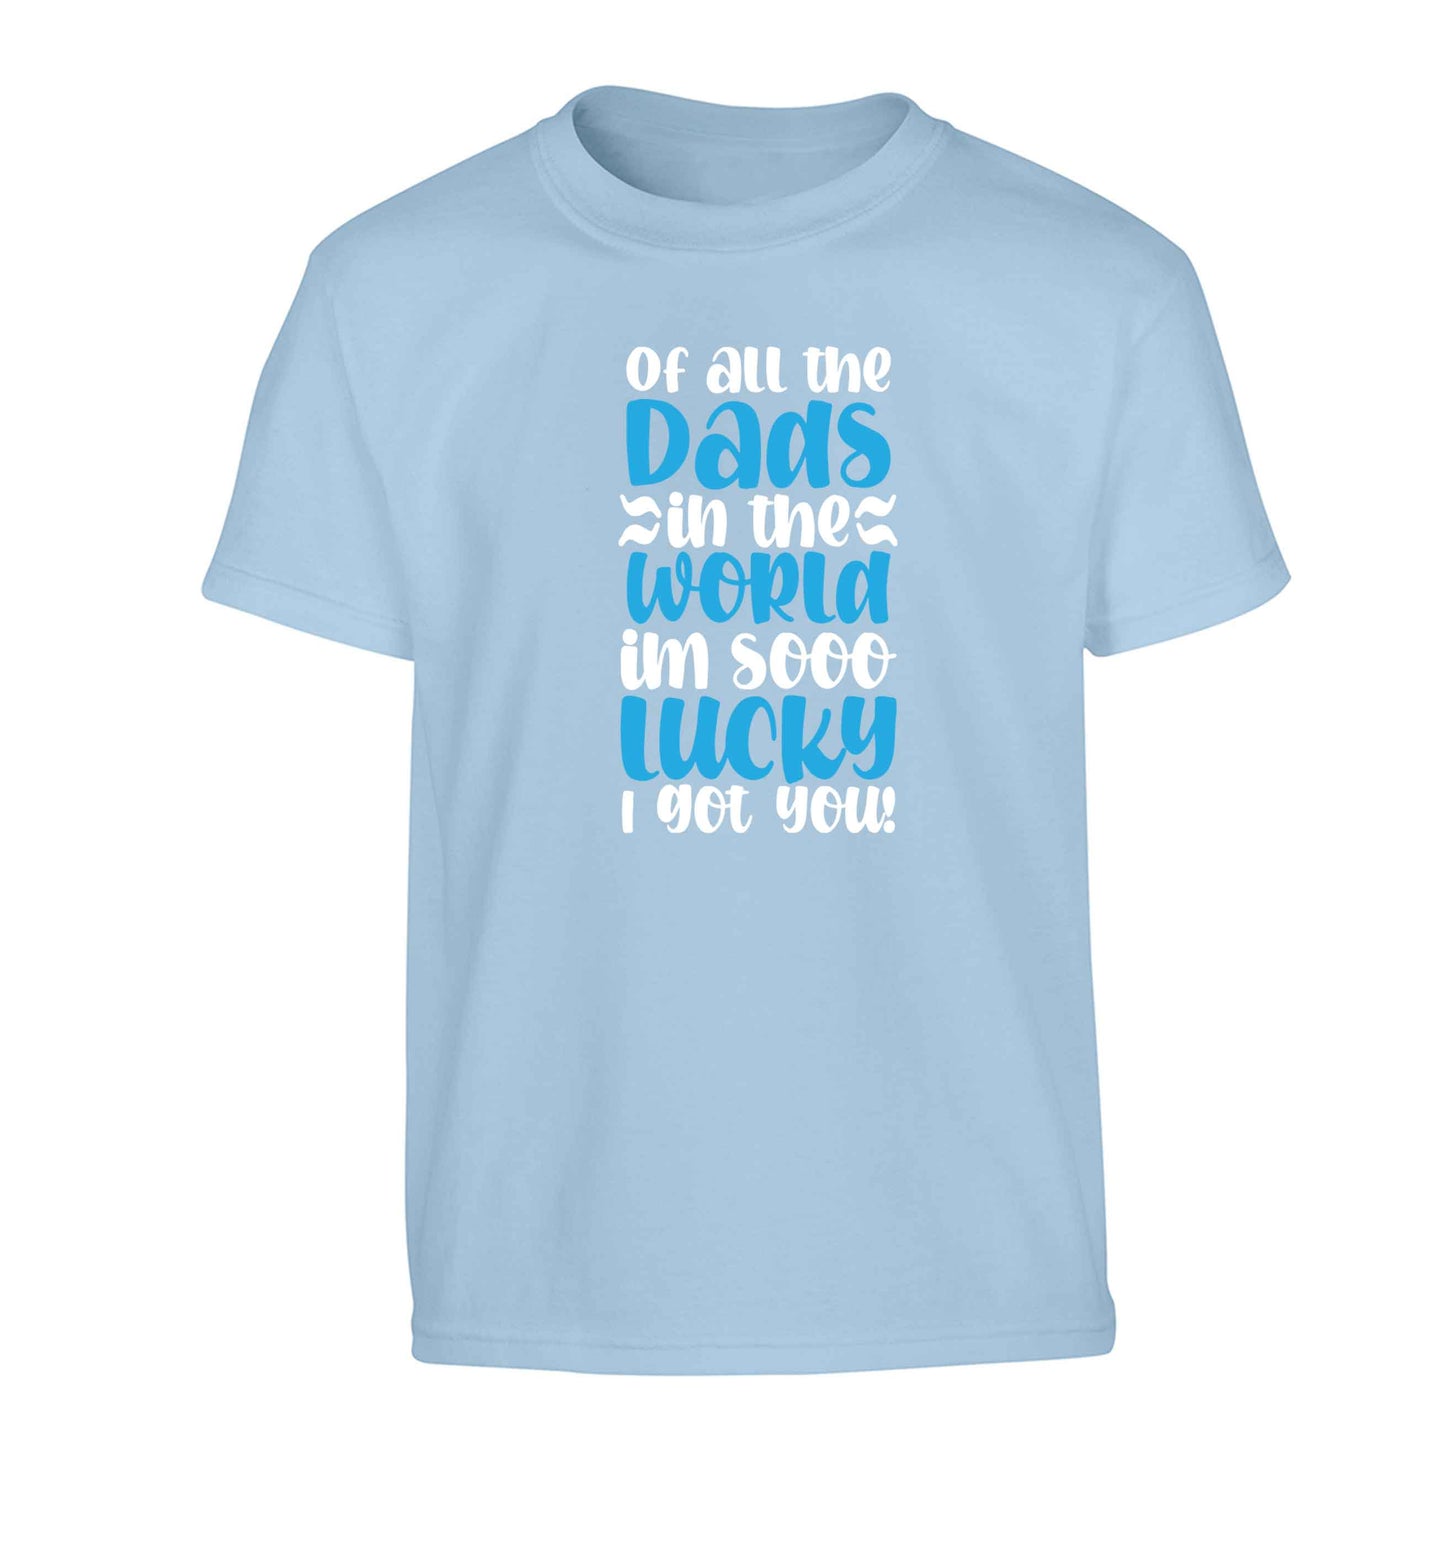 I'm as lucky as can be the worlds greatest dad belongs to me! Children's light blue Tshirt 12-13 Years